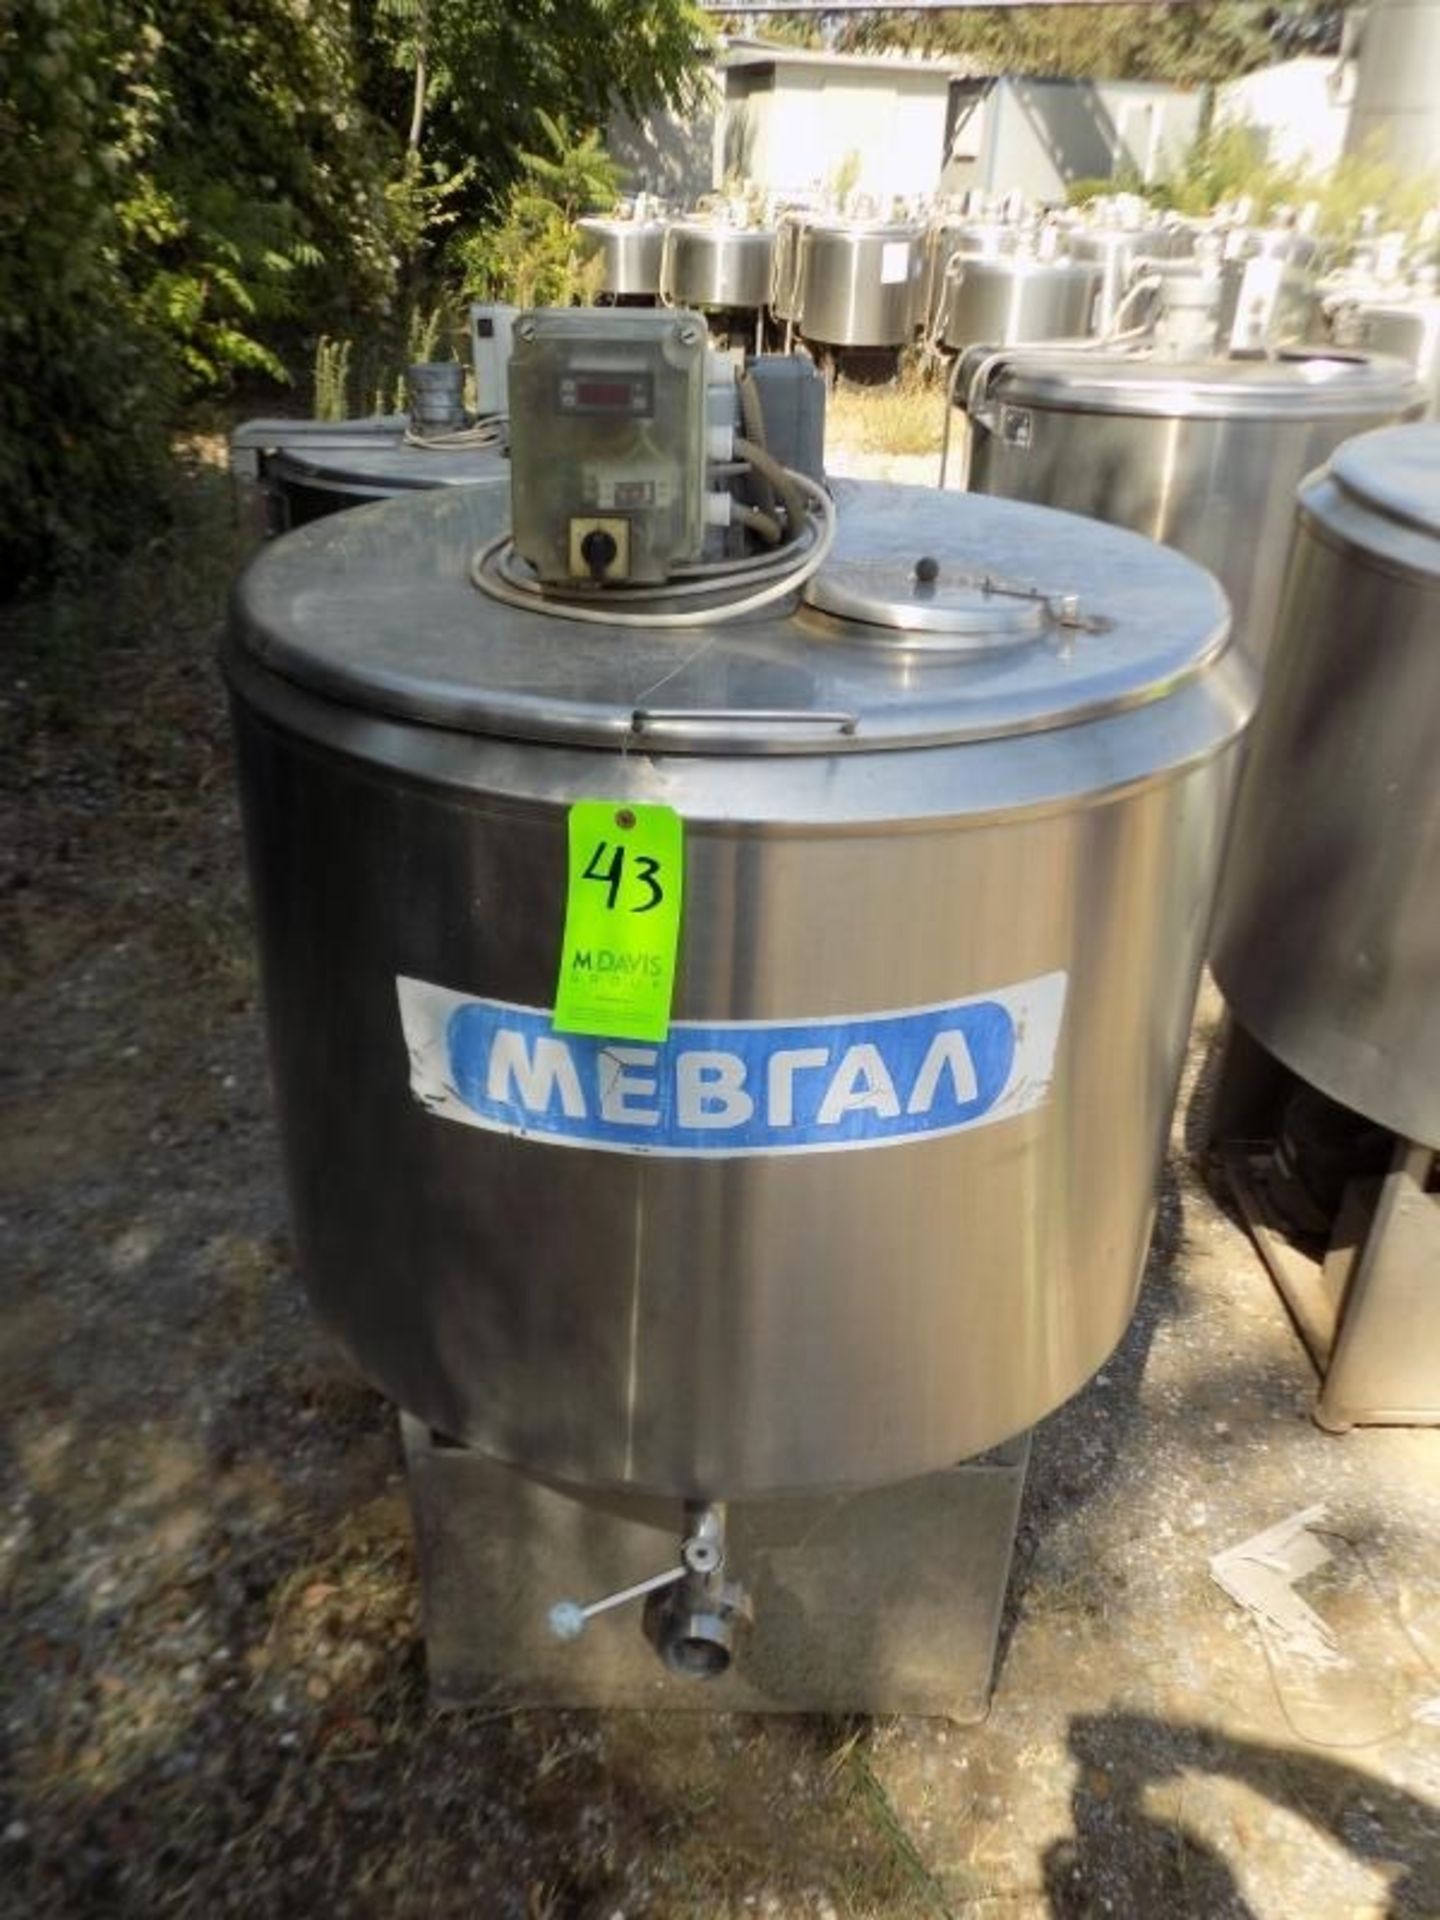 Ermicon (Packo) Aprox. 300 L/79 Gal. Jacketed S/S Farm Tank with Hinged Lid, Twin Blade Prop Motor